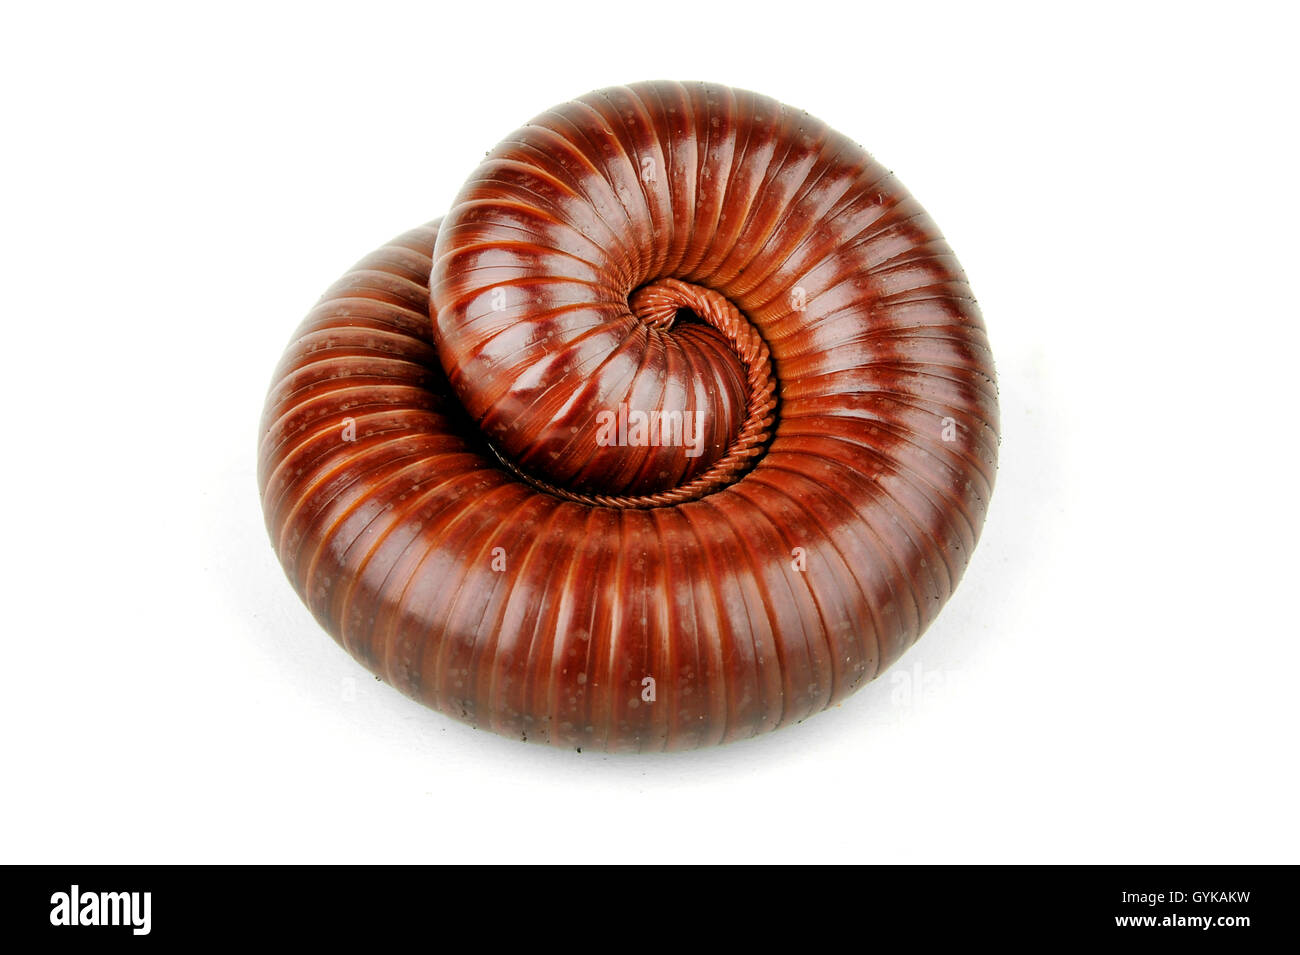 Giant chocolate, Chocolate millipede (Ophistreptus guineensis), millipede in defense posture Stock Photo